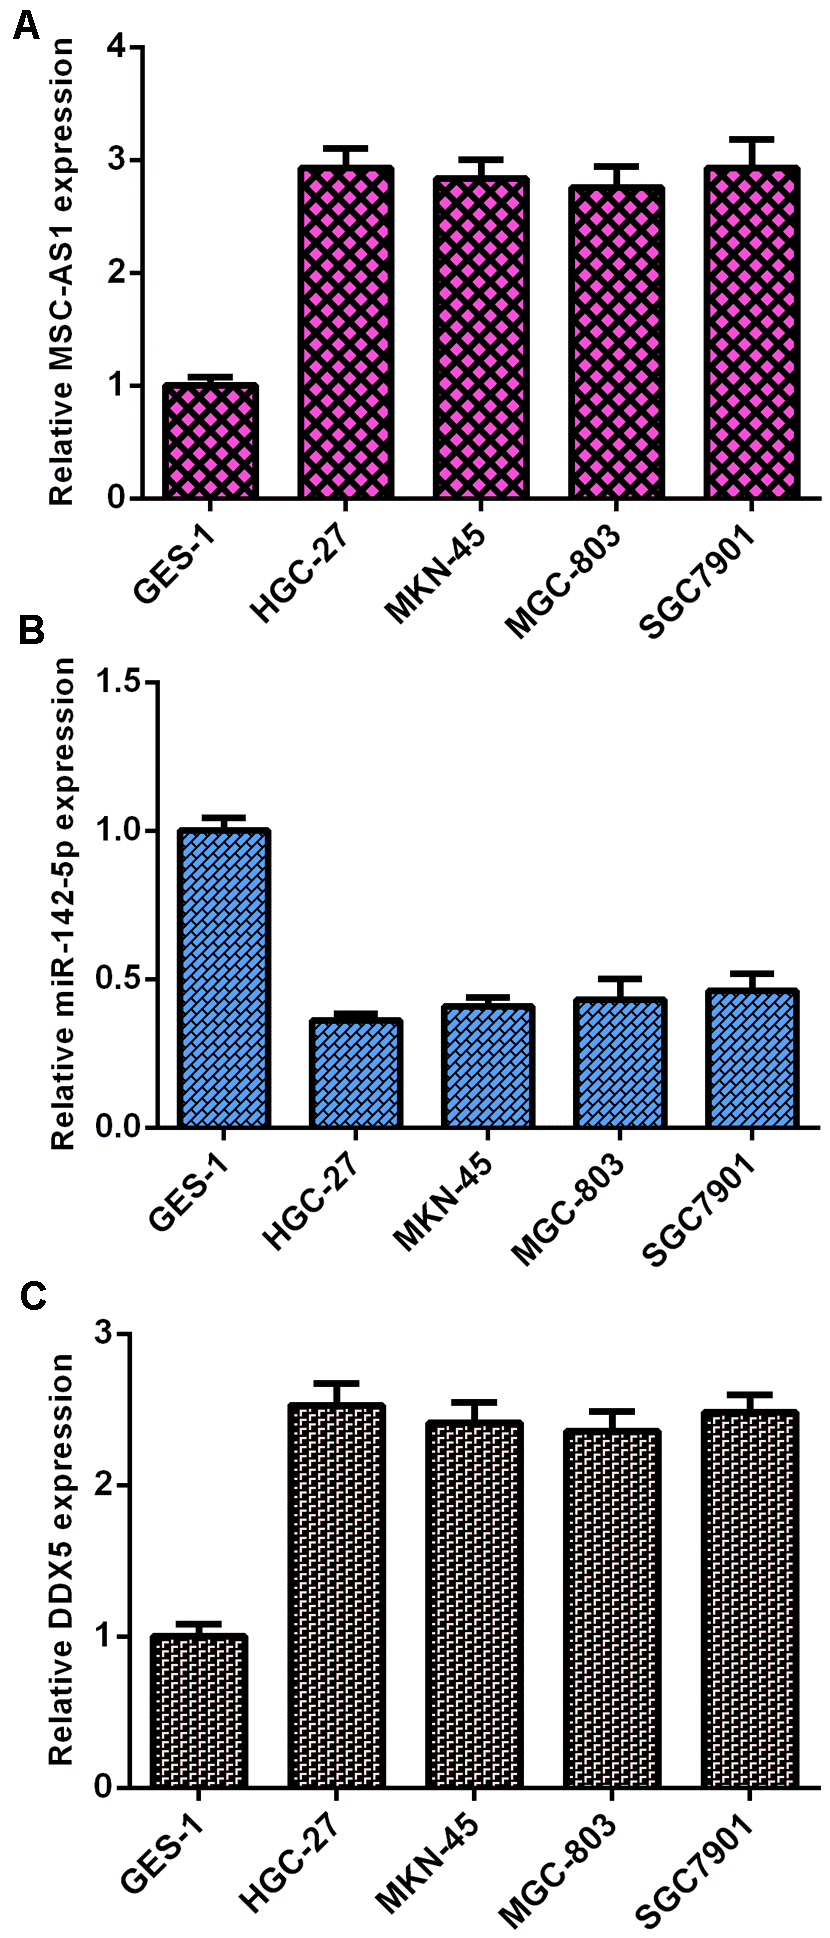 MSC-AS1 and DDX5 were overexpressed and miR-142-5p was downregulated in GC cells. (A) The expression of MSC-AS1 was detected by qRT-PCR analysis. GAPDH was used as the internal control. (B) The expression of miR-142-5p was detected by qRT-PCR analysis. U6 was used as the internal control. (C) DDX5 was upregulated in GC cells (HGC-27, MKN-45, SGC-7901 and MGC-803 cells) compared to GES cells. GAPDH was used as the internal control.